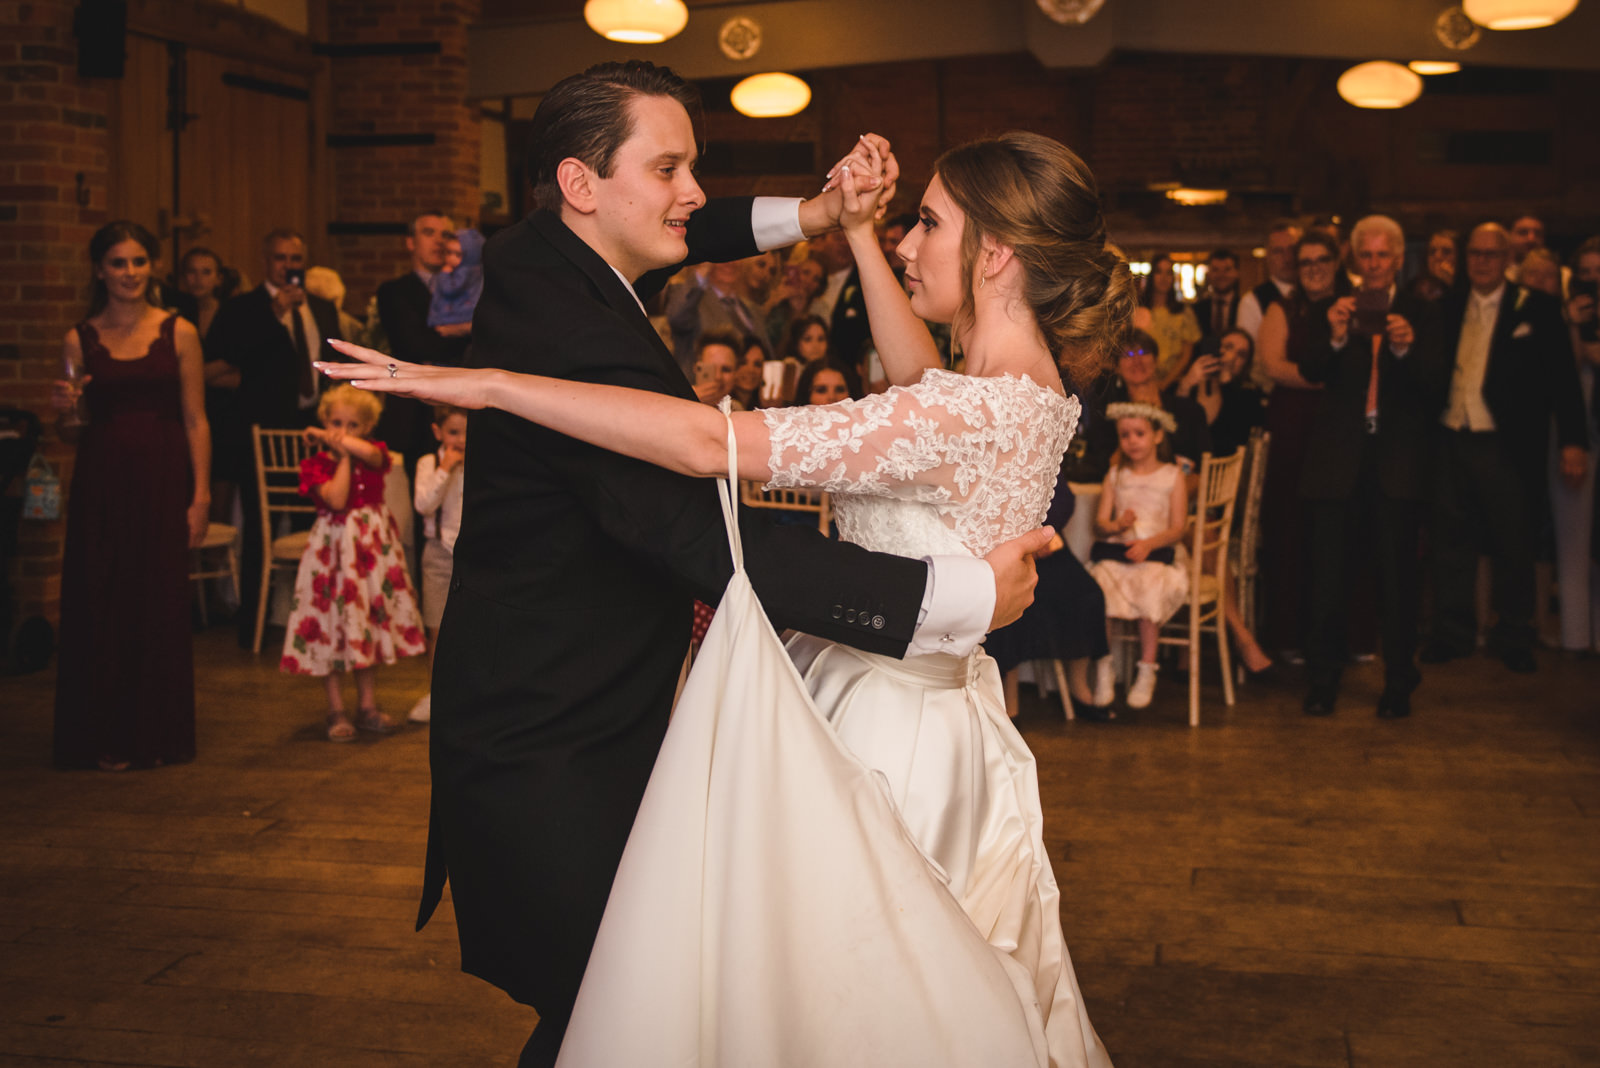 The first dance by ballroom dancing bride and groom.